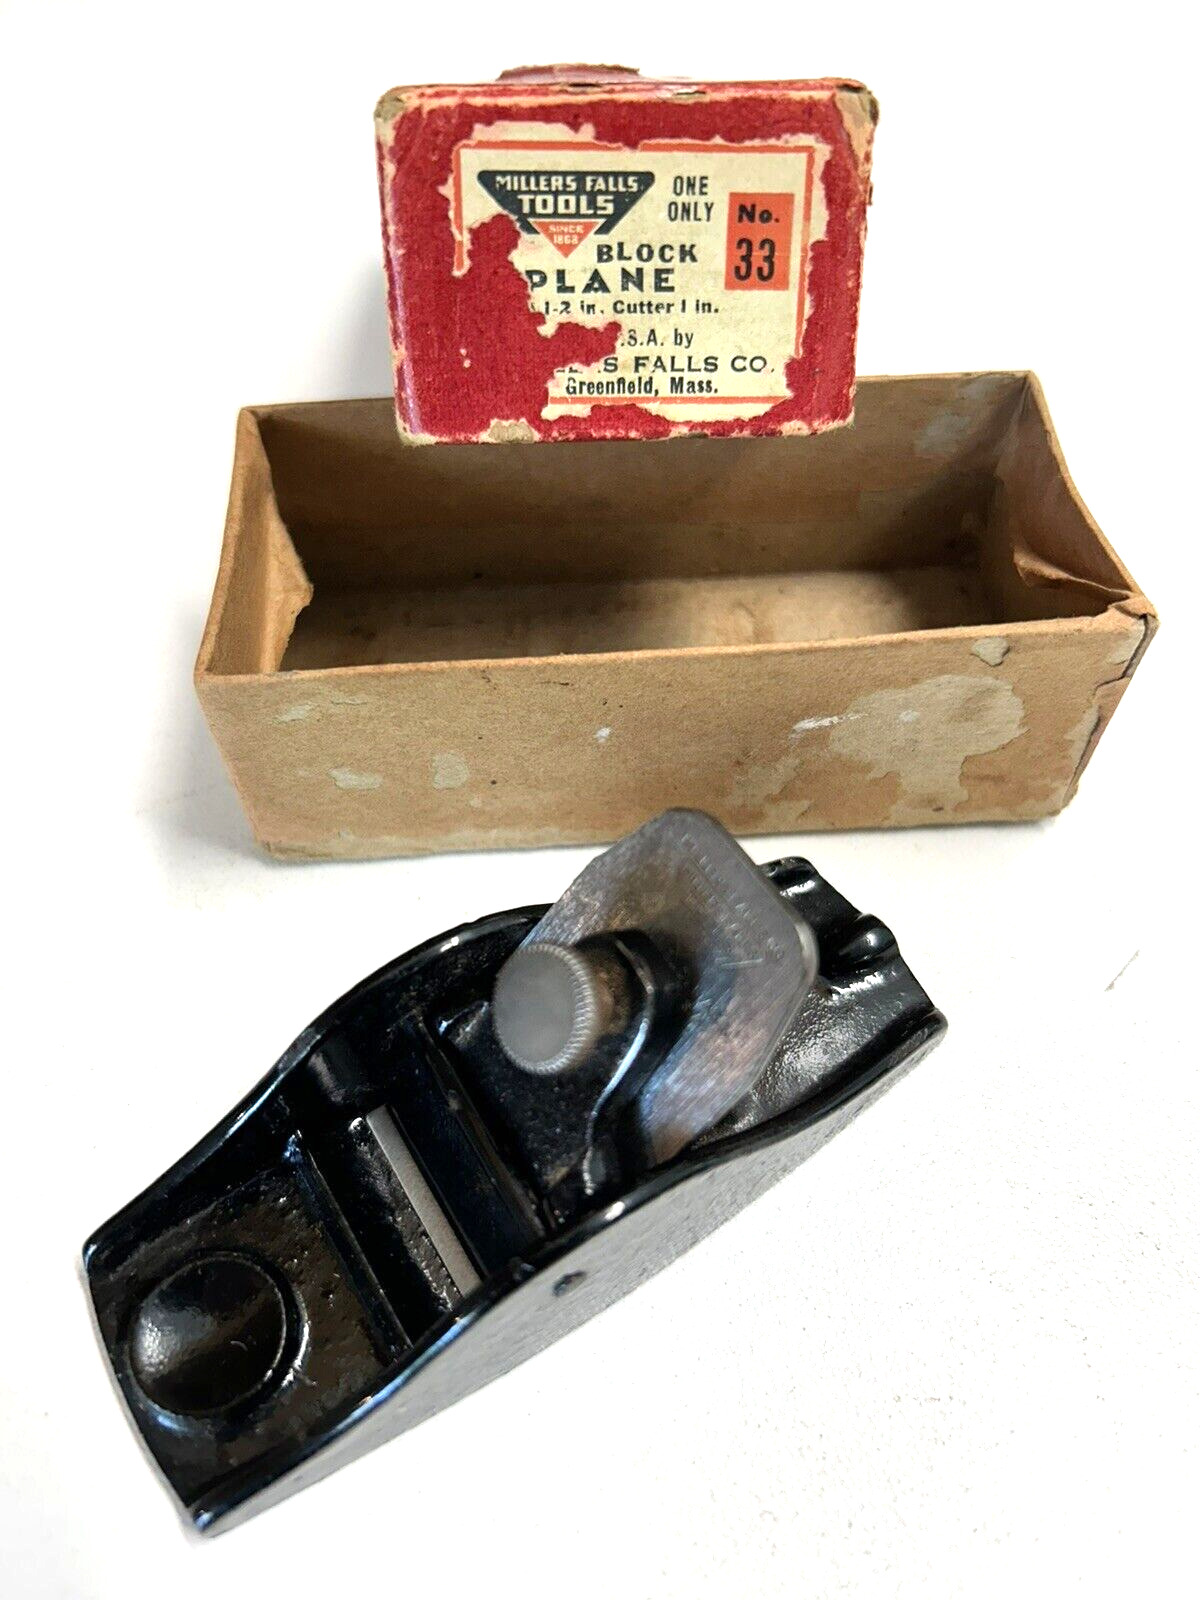 Vintage Millers Falls No. 33 Tiny Block Plane  - Thumb Plane Made in USA